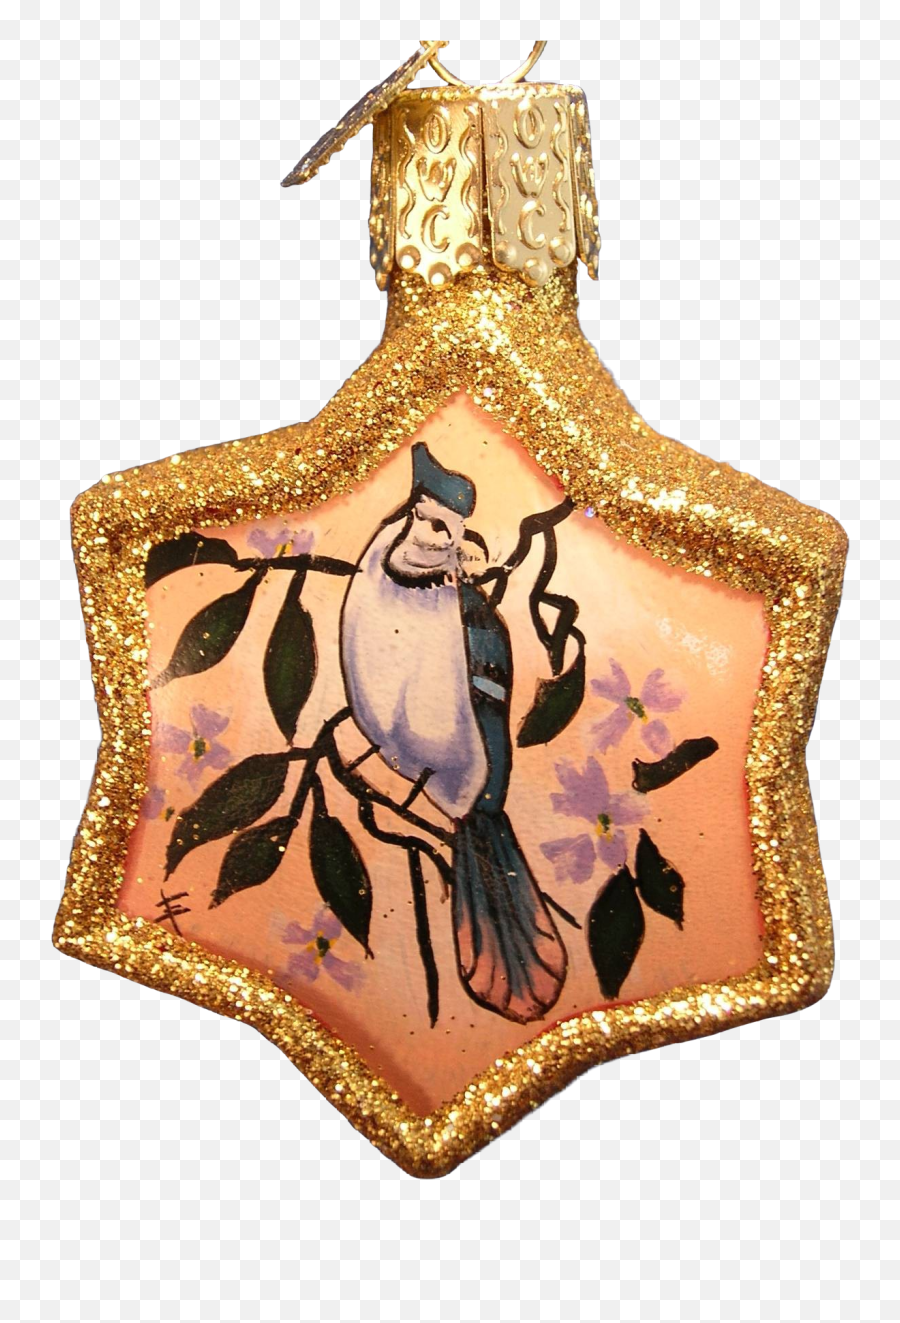 Blue Jay Ornament By Old World Christmas Emoji,Blue Jay Png